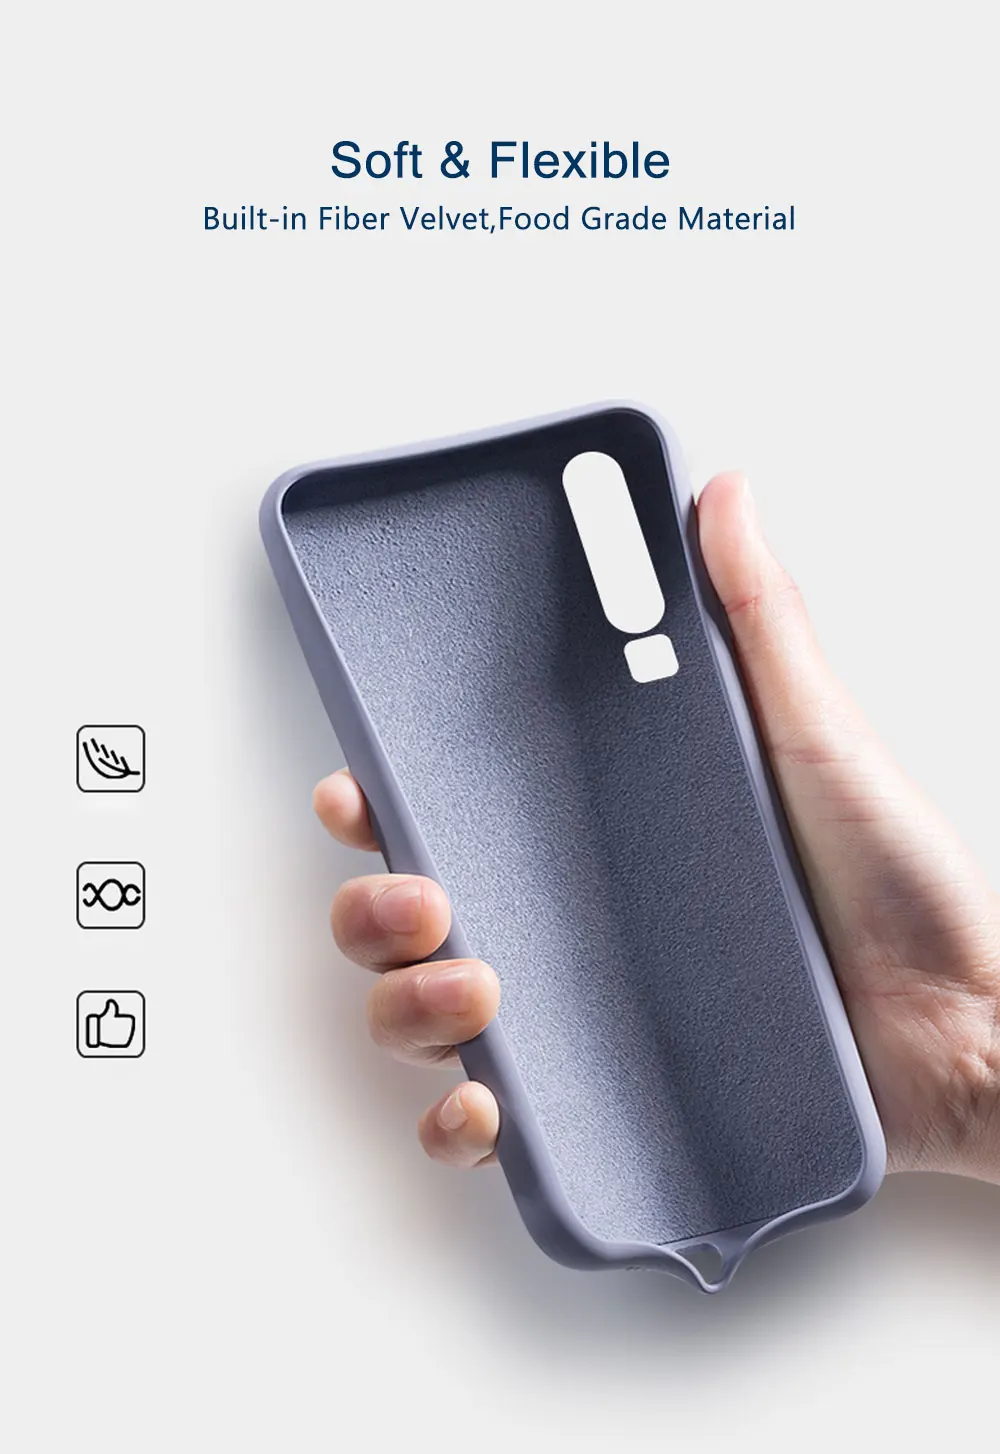 For Huawei P20 lite Case Shockproof Liquid Silicone Case For Huawei P20 L ite Lte Pro P Smart Z Case Cover